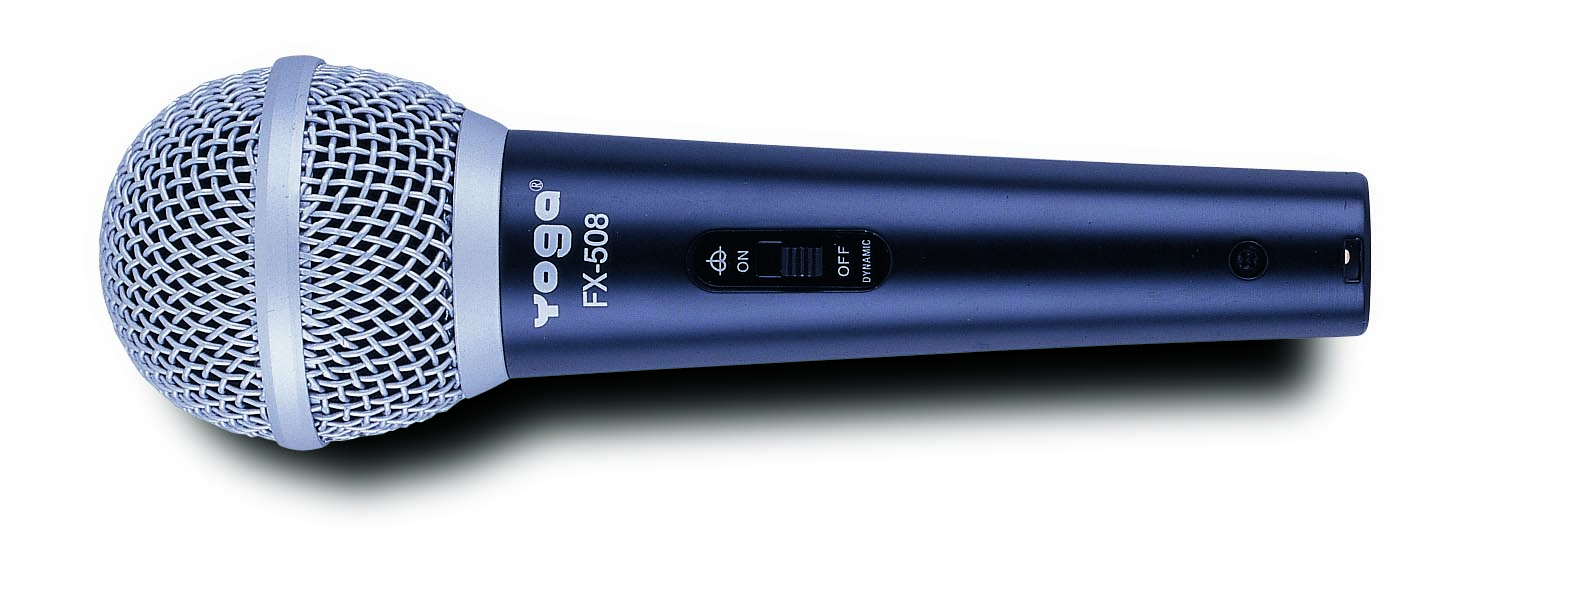 Dynamic Vocal Hand-Held Microphone for Live Performances or Broadcasts-FX-508